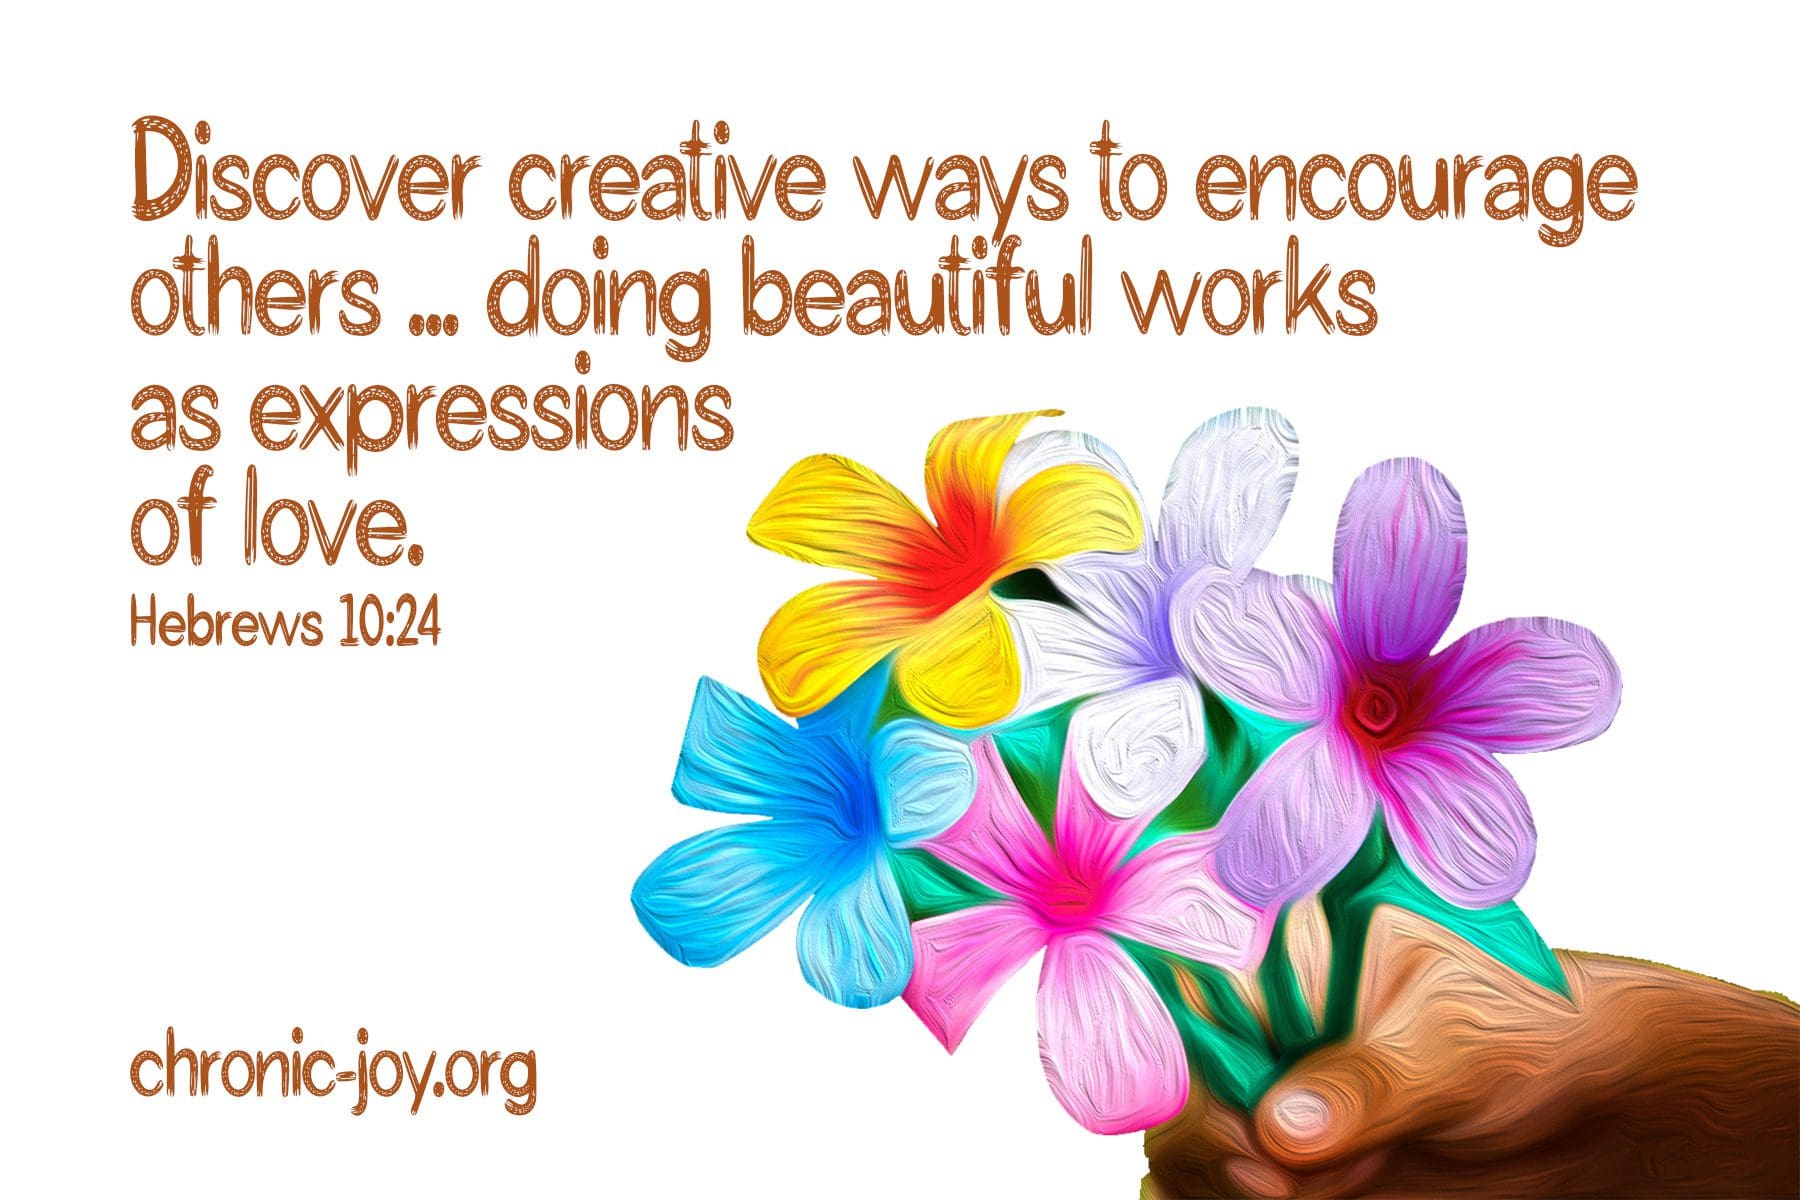 "Discover creative ways to encourage others ... doing beautiful works as expressions of love." Hebrews 10:24